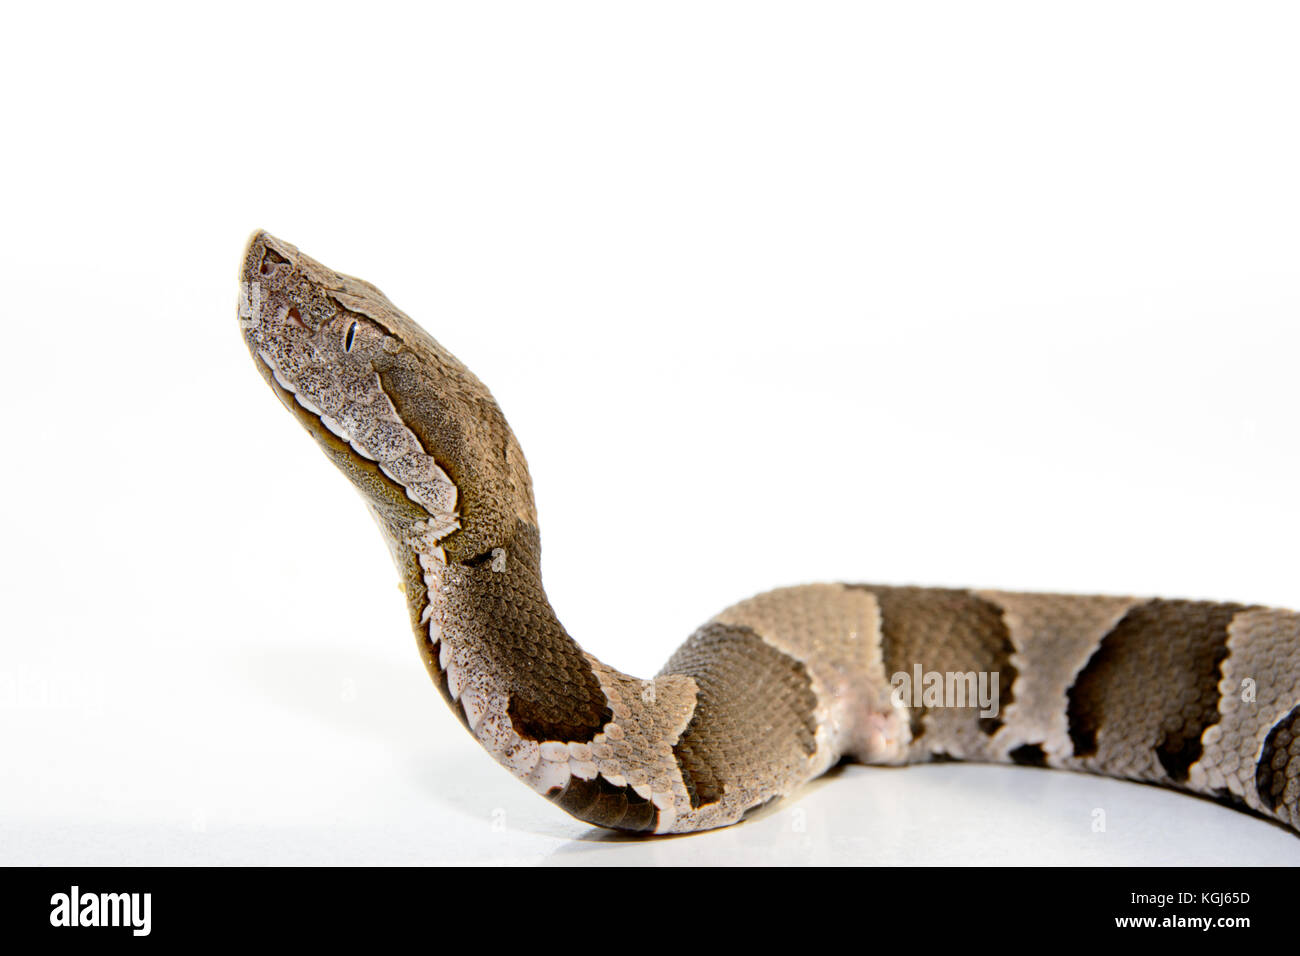 Broad-Band Copperhead snake (Agkistrodon contortrix laticinctus) on white background coiled and ready to strike Stock Photo